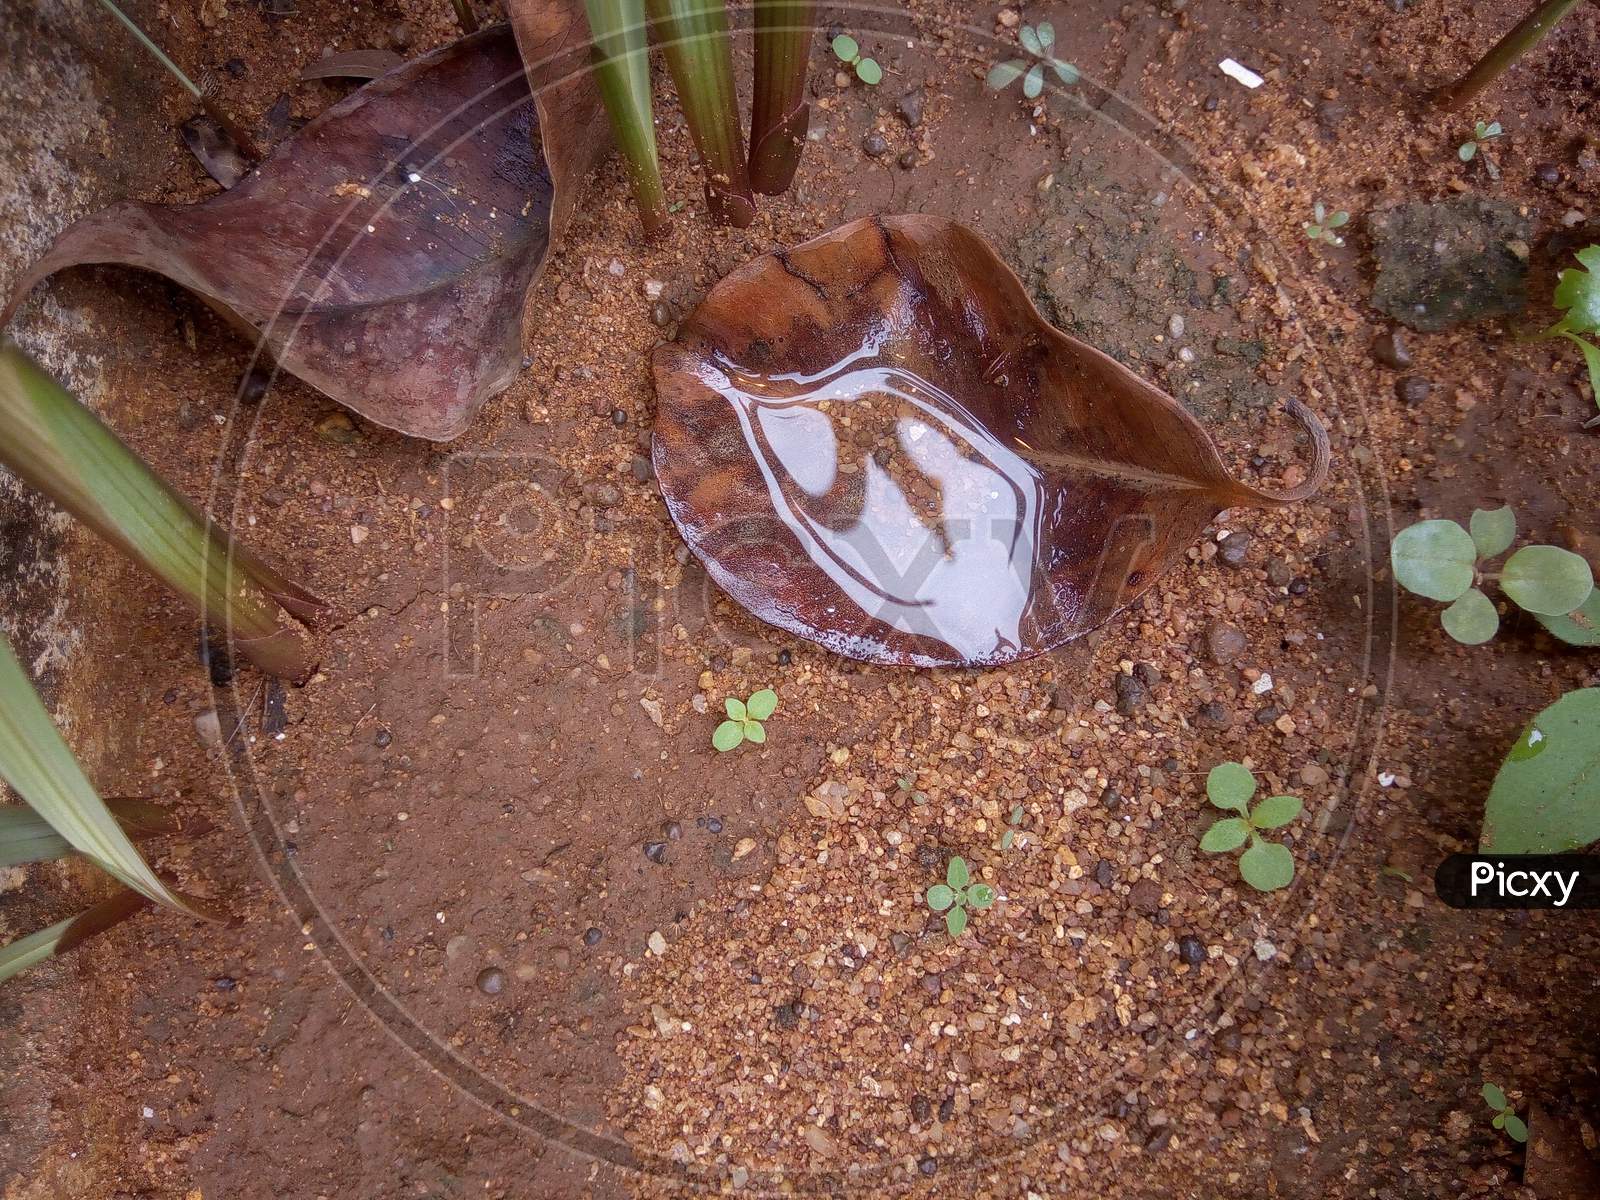 Water on the dry leaf